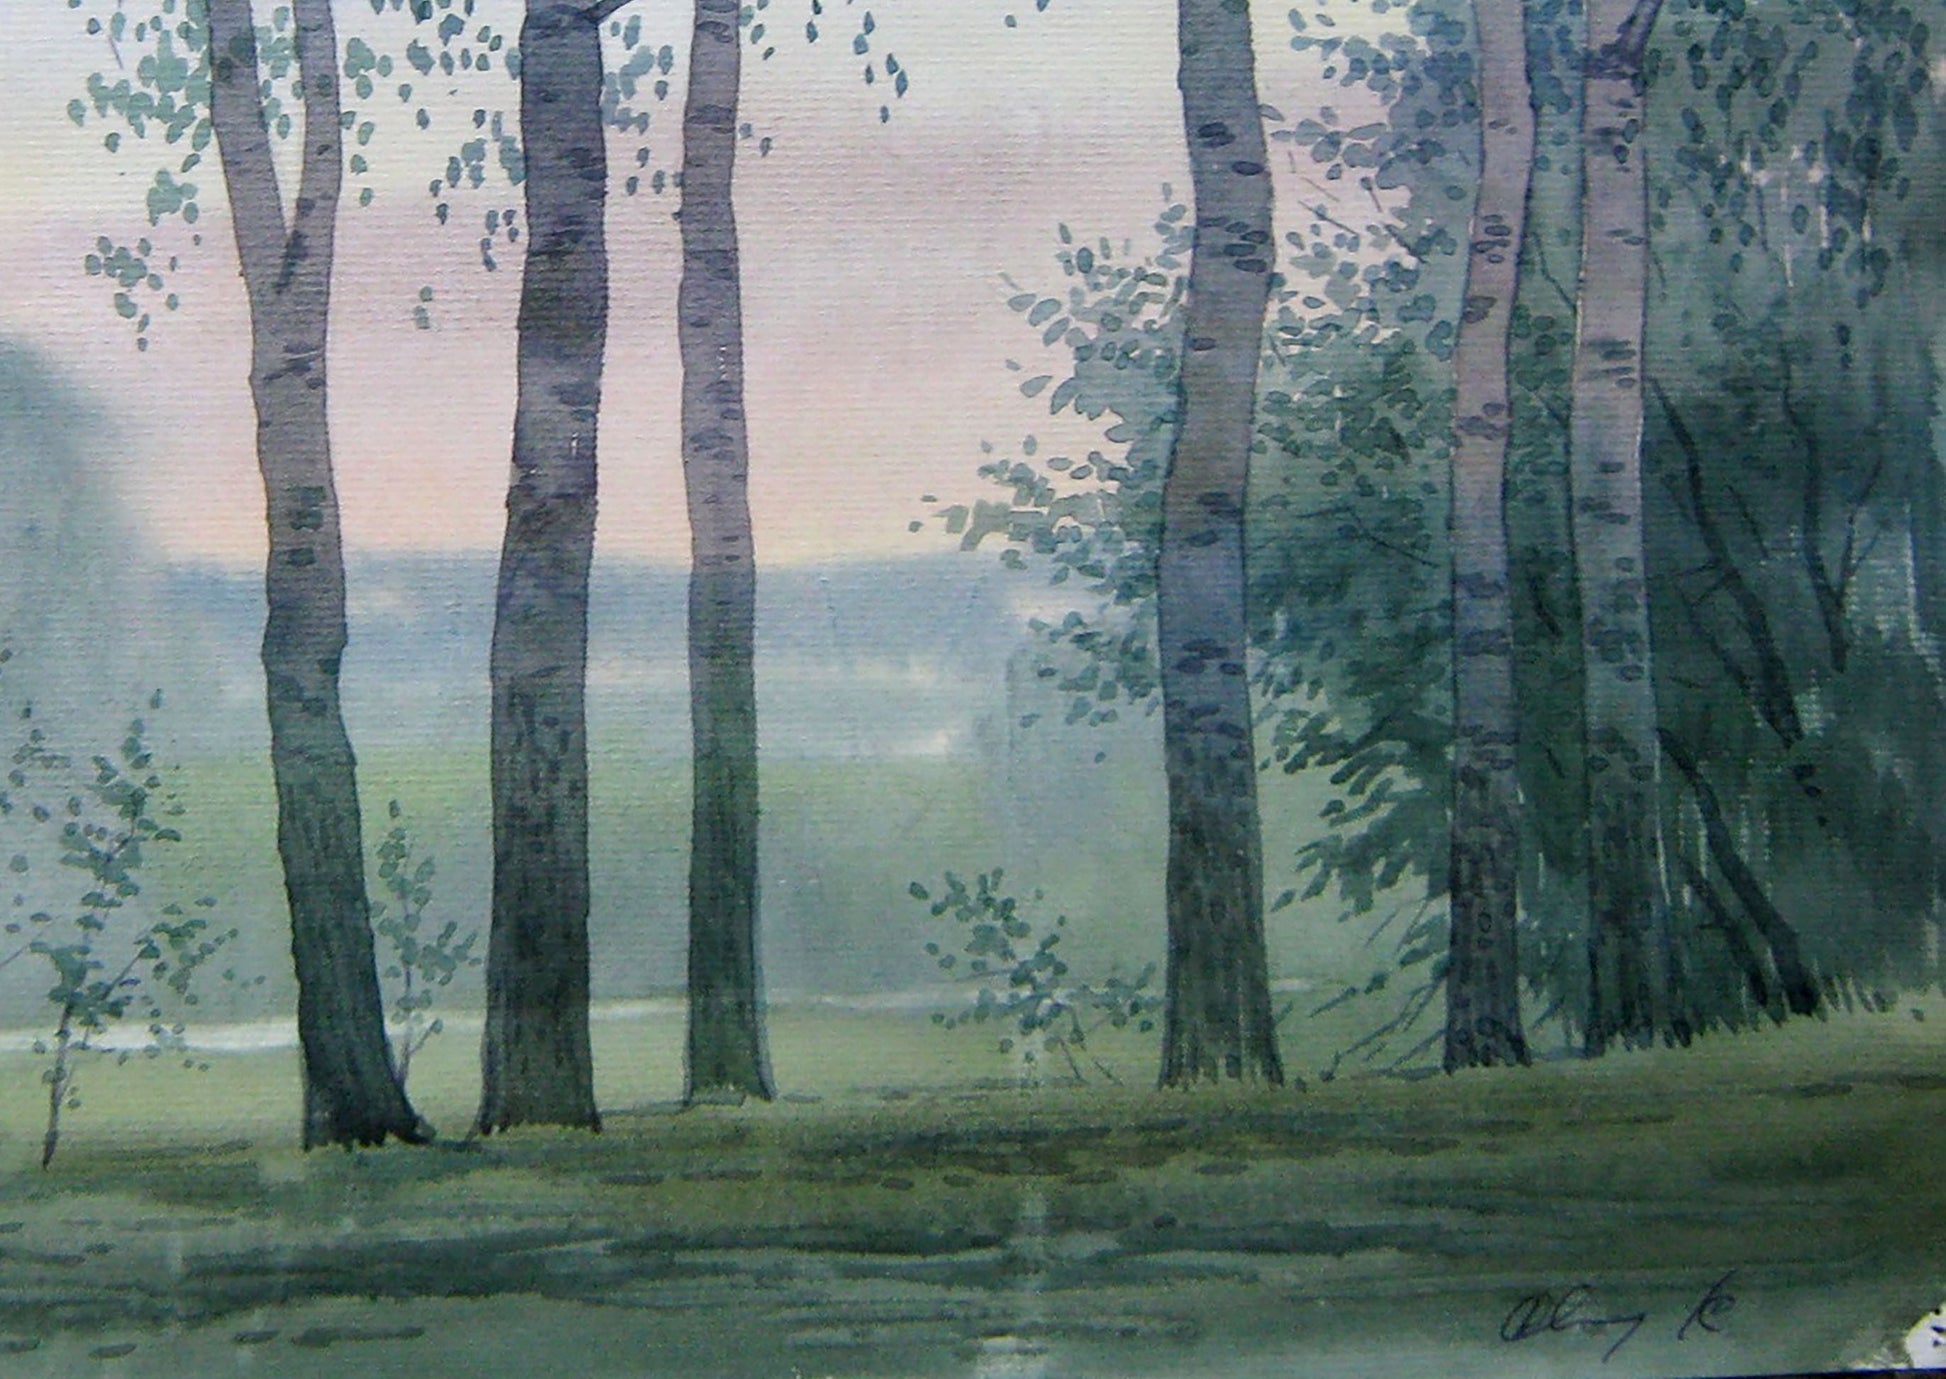 Valery Savenets' exquisite watercolor captures the beauty of "Birches in the Forest"